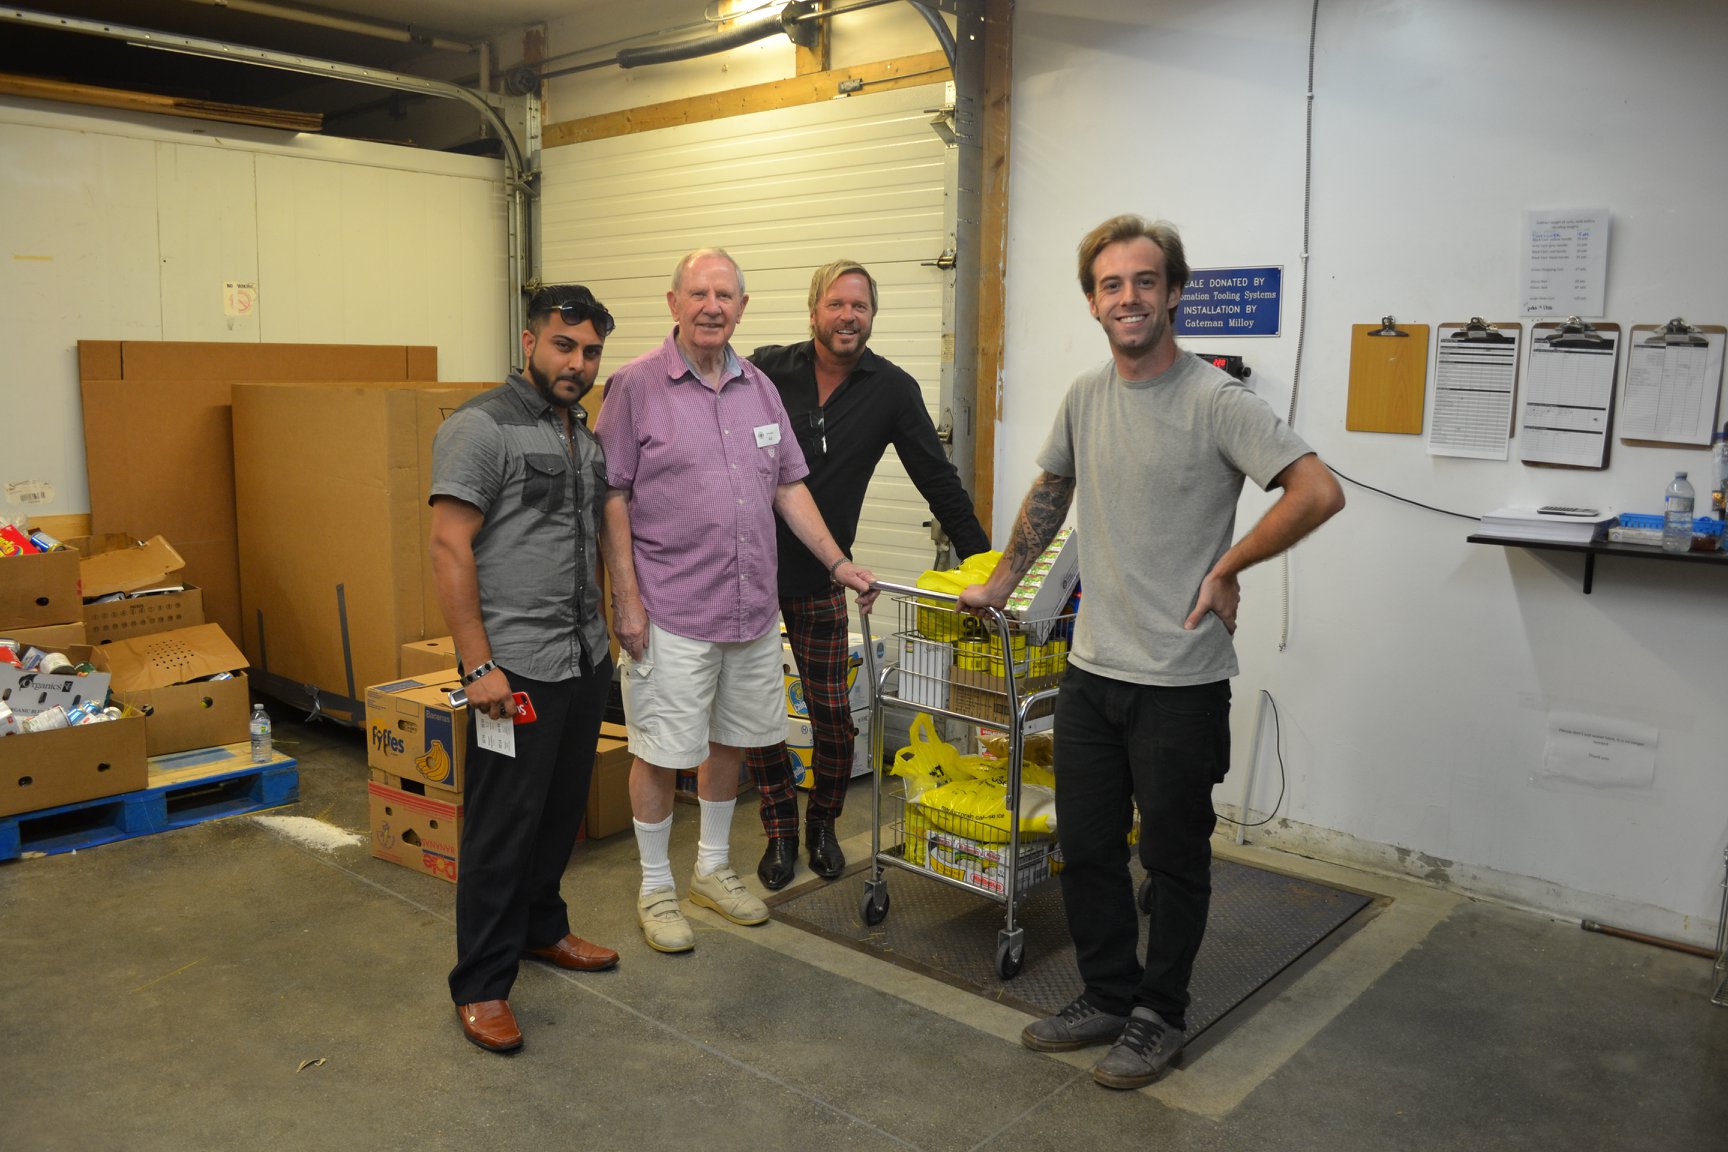 OFWA helping with foodbank in cmbridge ontario